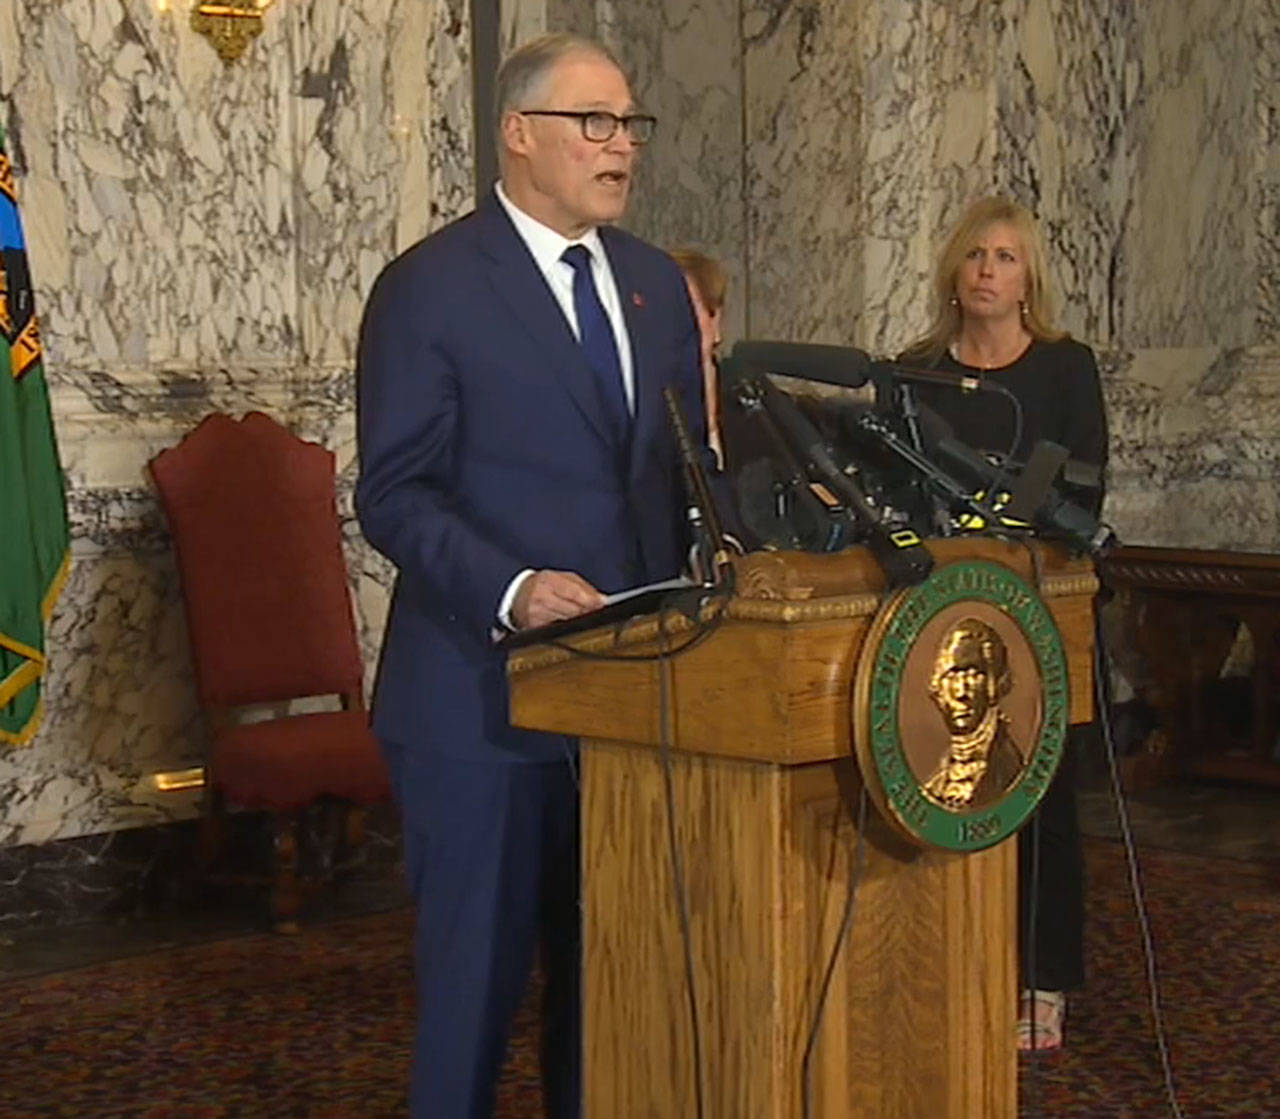 Inslee announces major school closures for a month